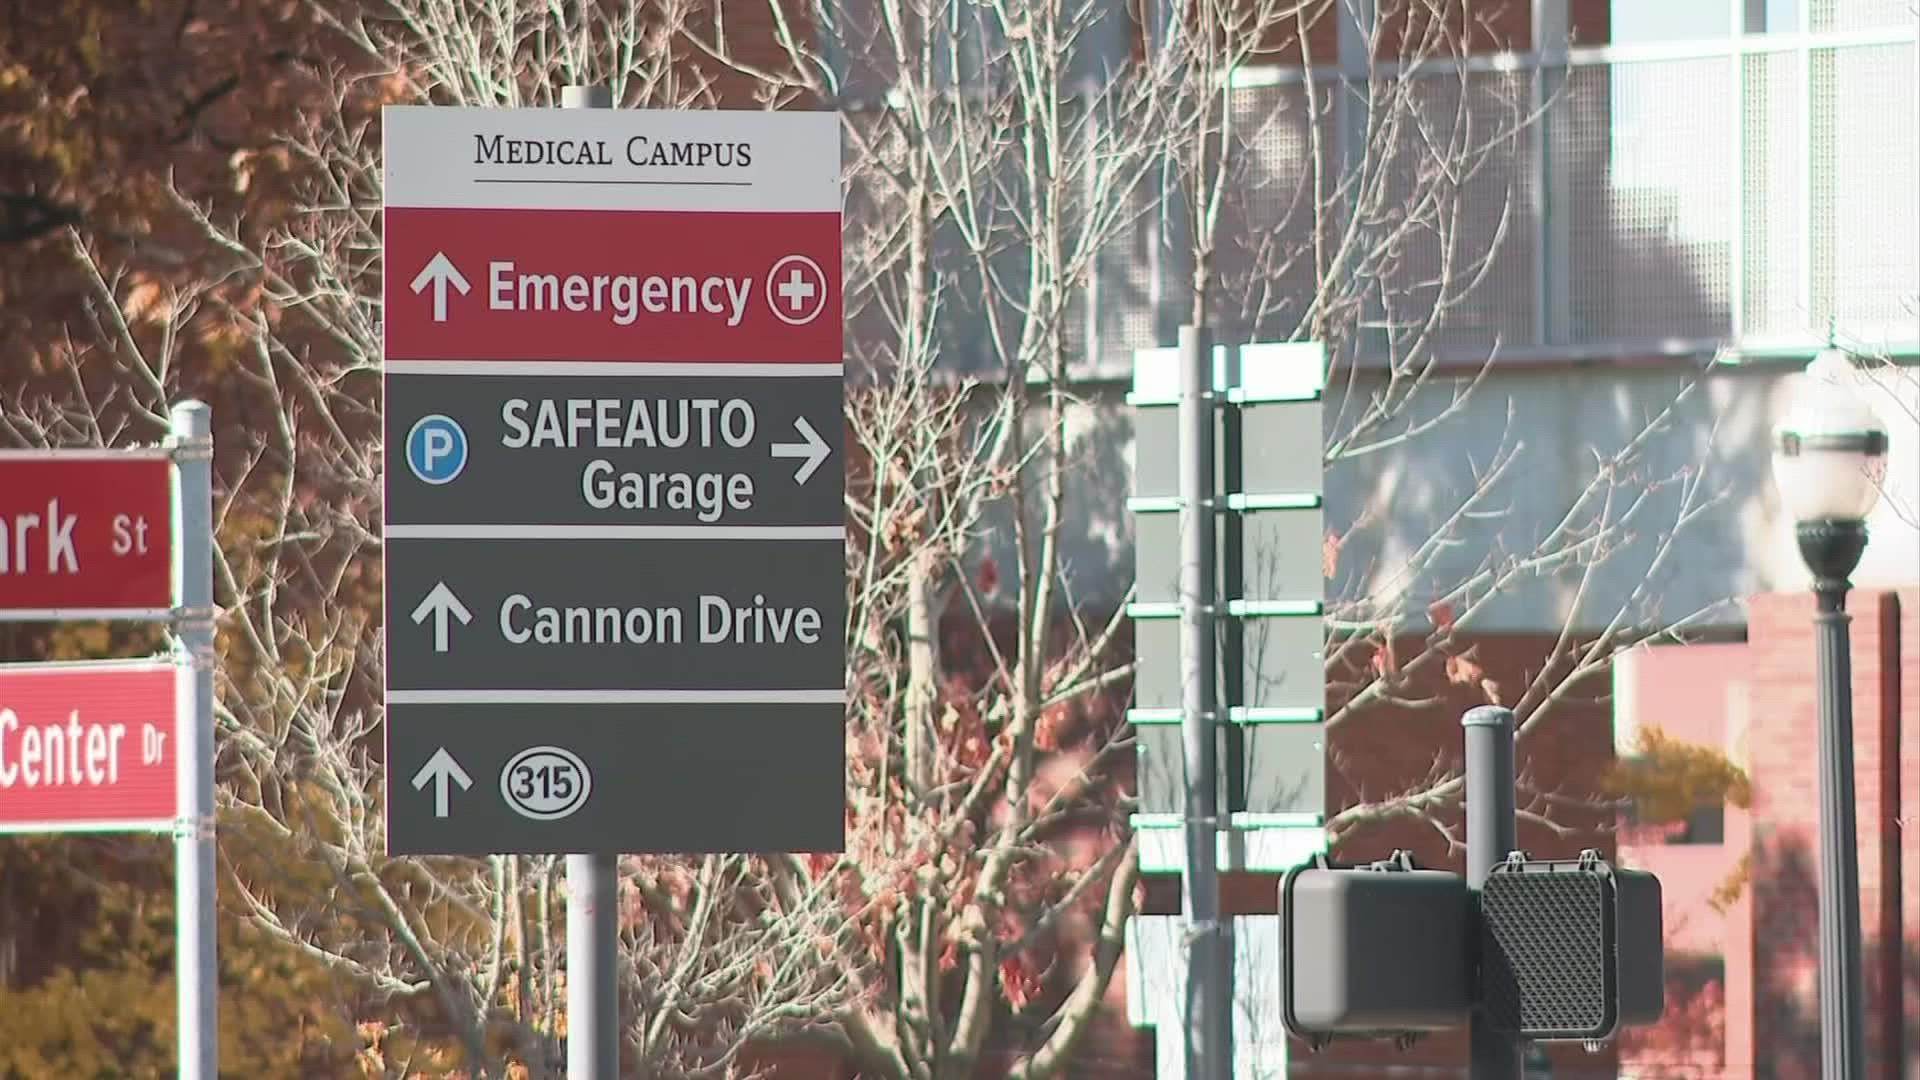 Hospital officials say these steps are needed following the recent surge in COVID-19 cases.